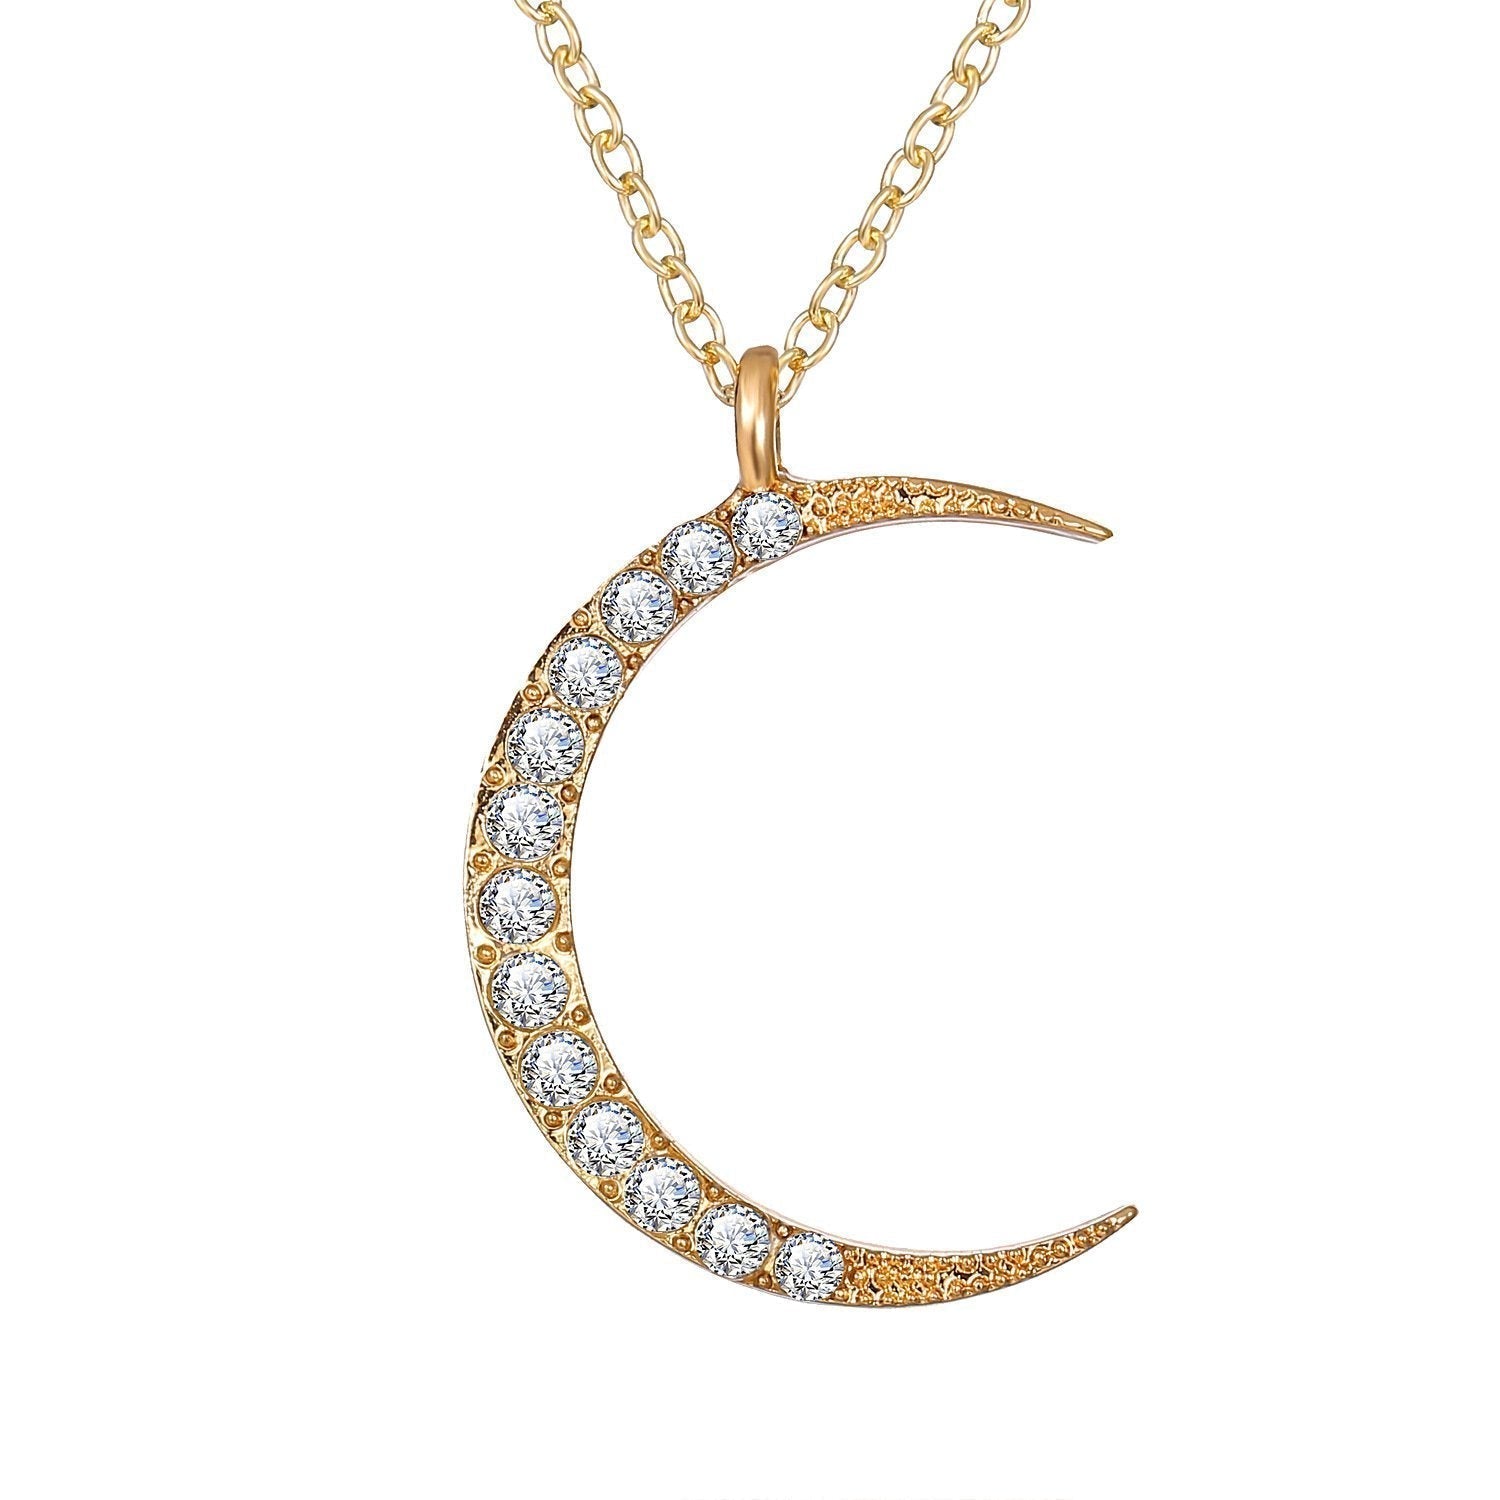 3 Piece Celestial Pave Necklace With  Crystals 18K Gold Plated Necklace ITALY Design Elsy Style Necklace